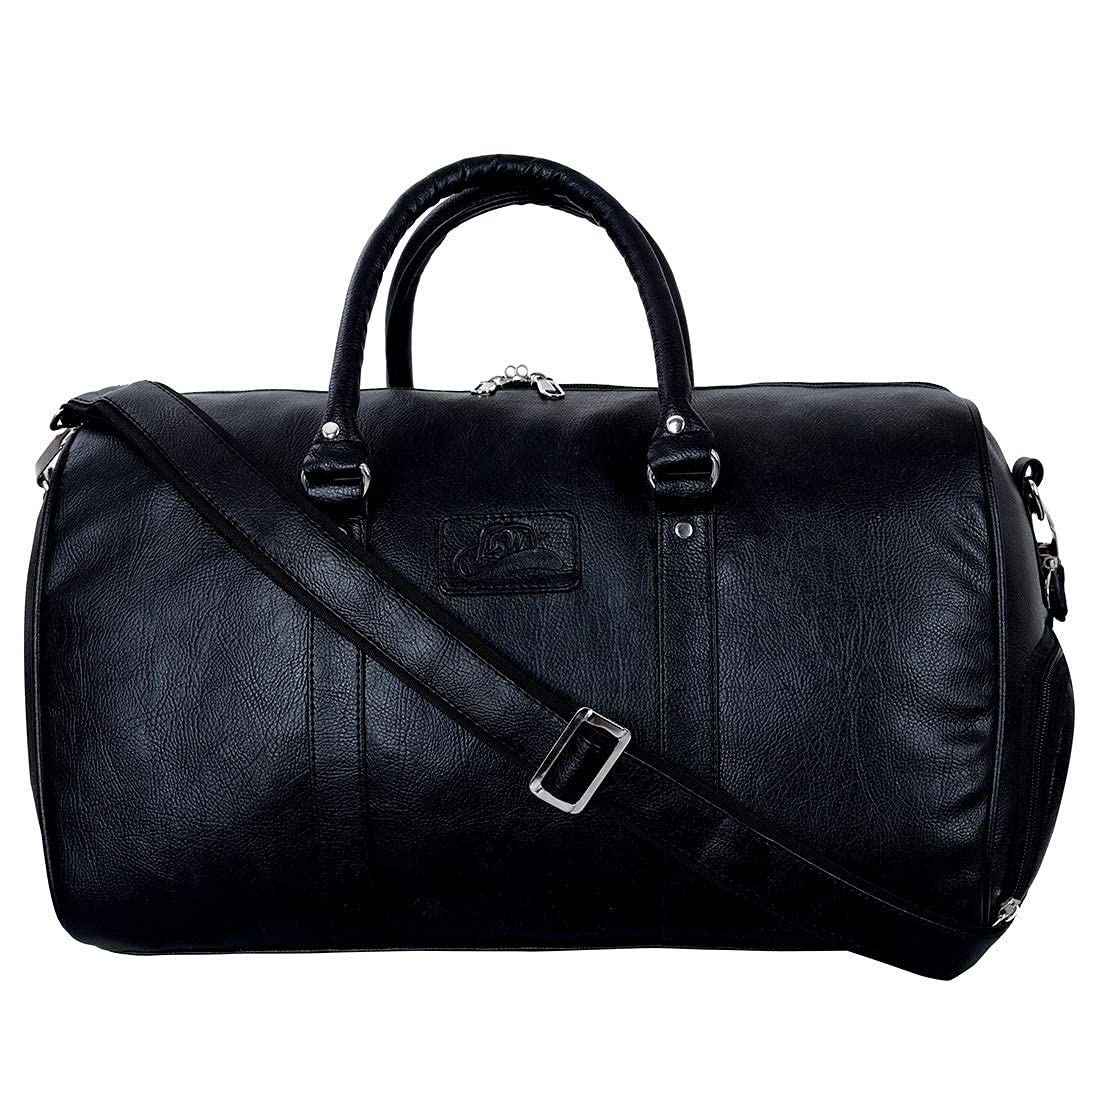 Leather World Black Pu Leather Sports Gym Duffle Bag with Shoe Compartment